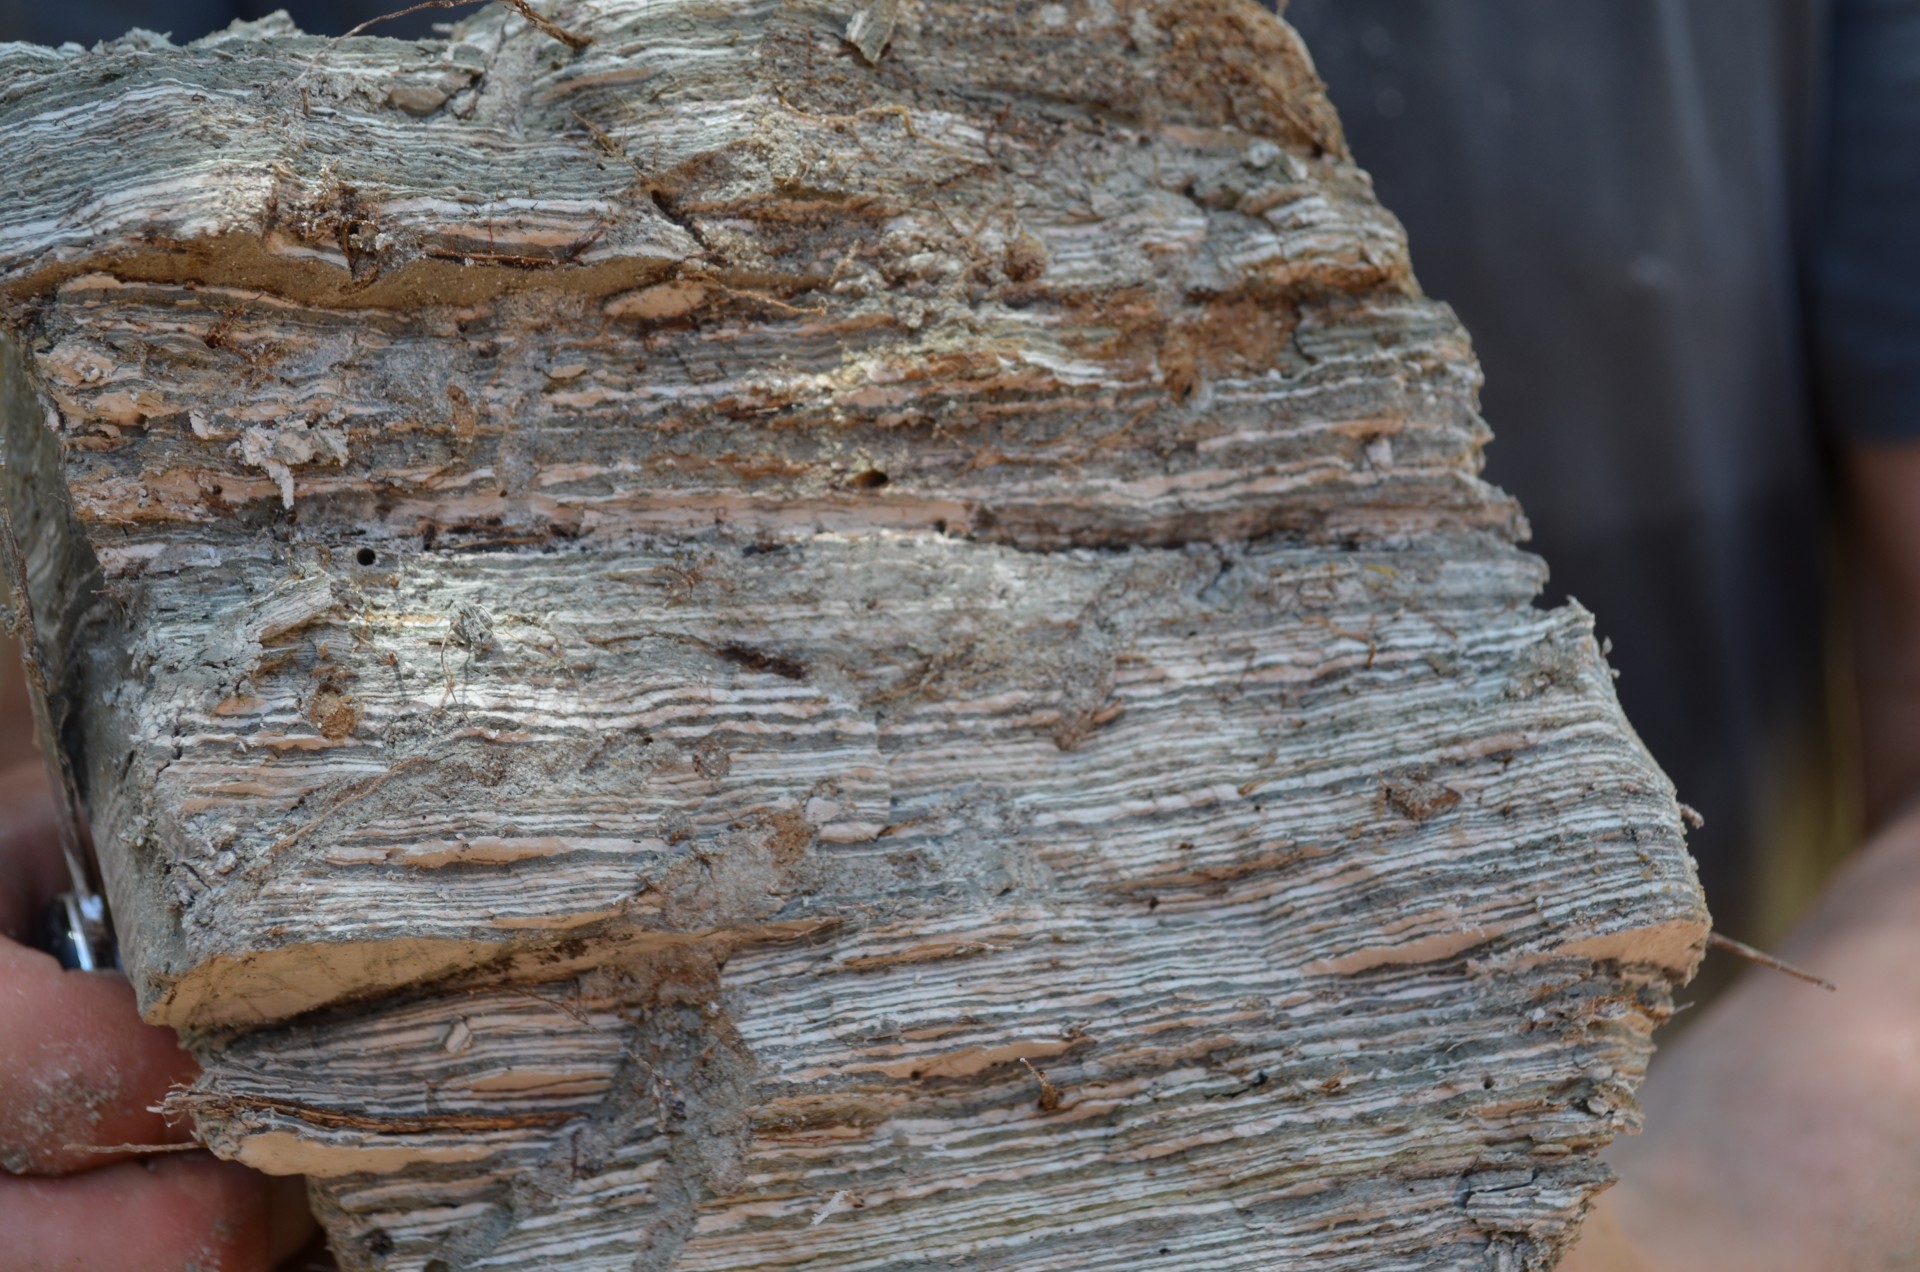 In a sample chiseled from a cliff face, alternating layers of whitish sediments and dark ones suggest dry and wet periods, respectively, during the past.